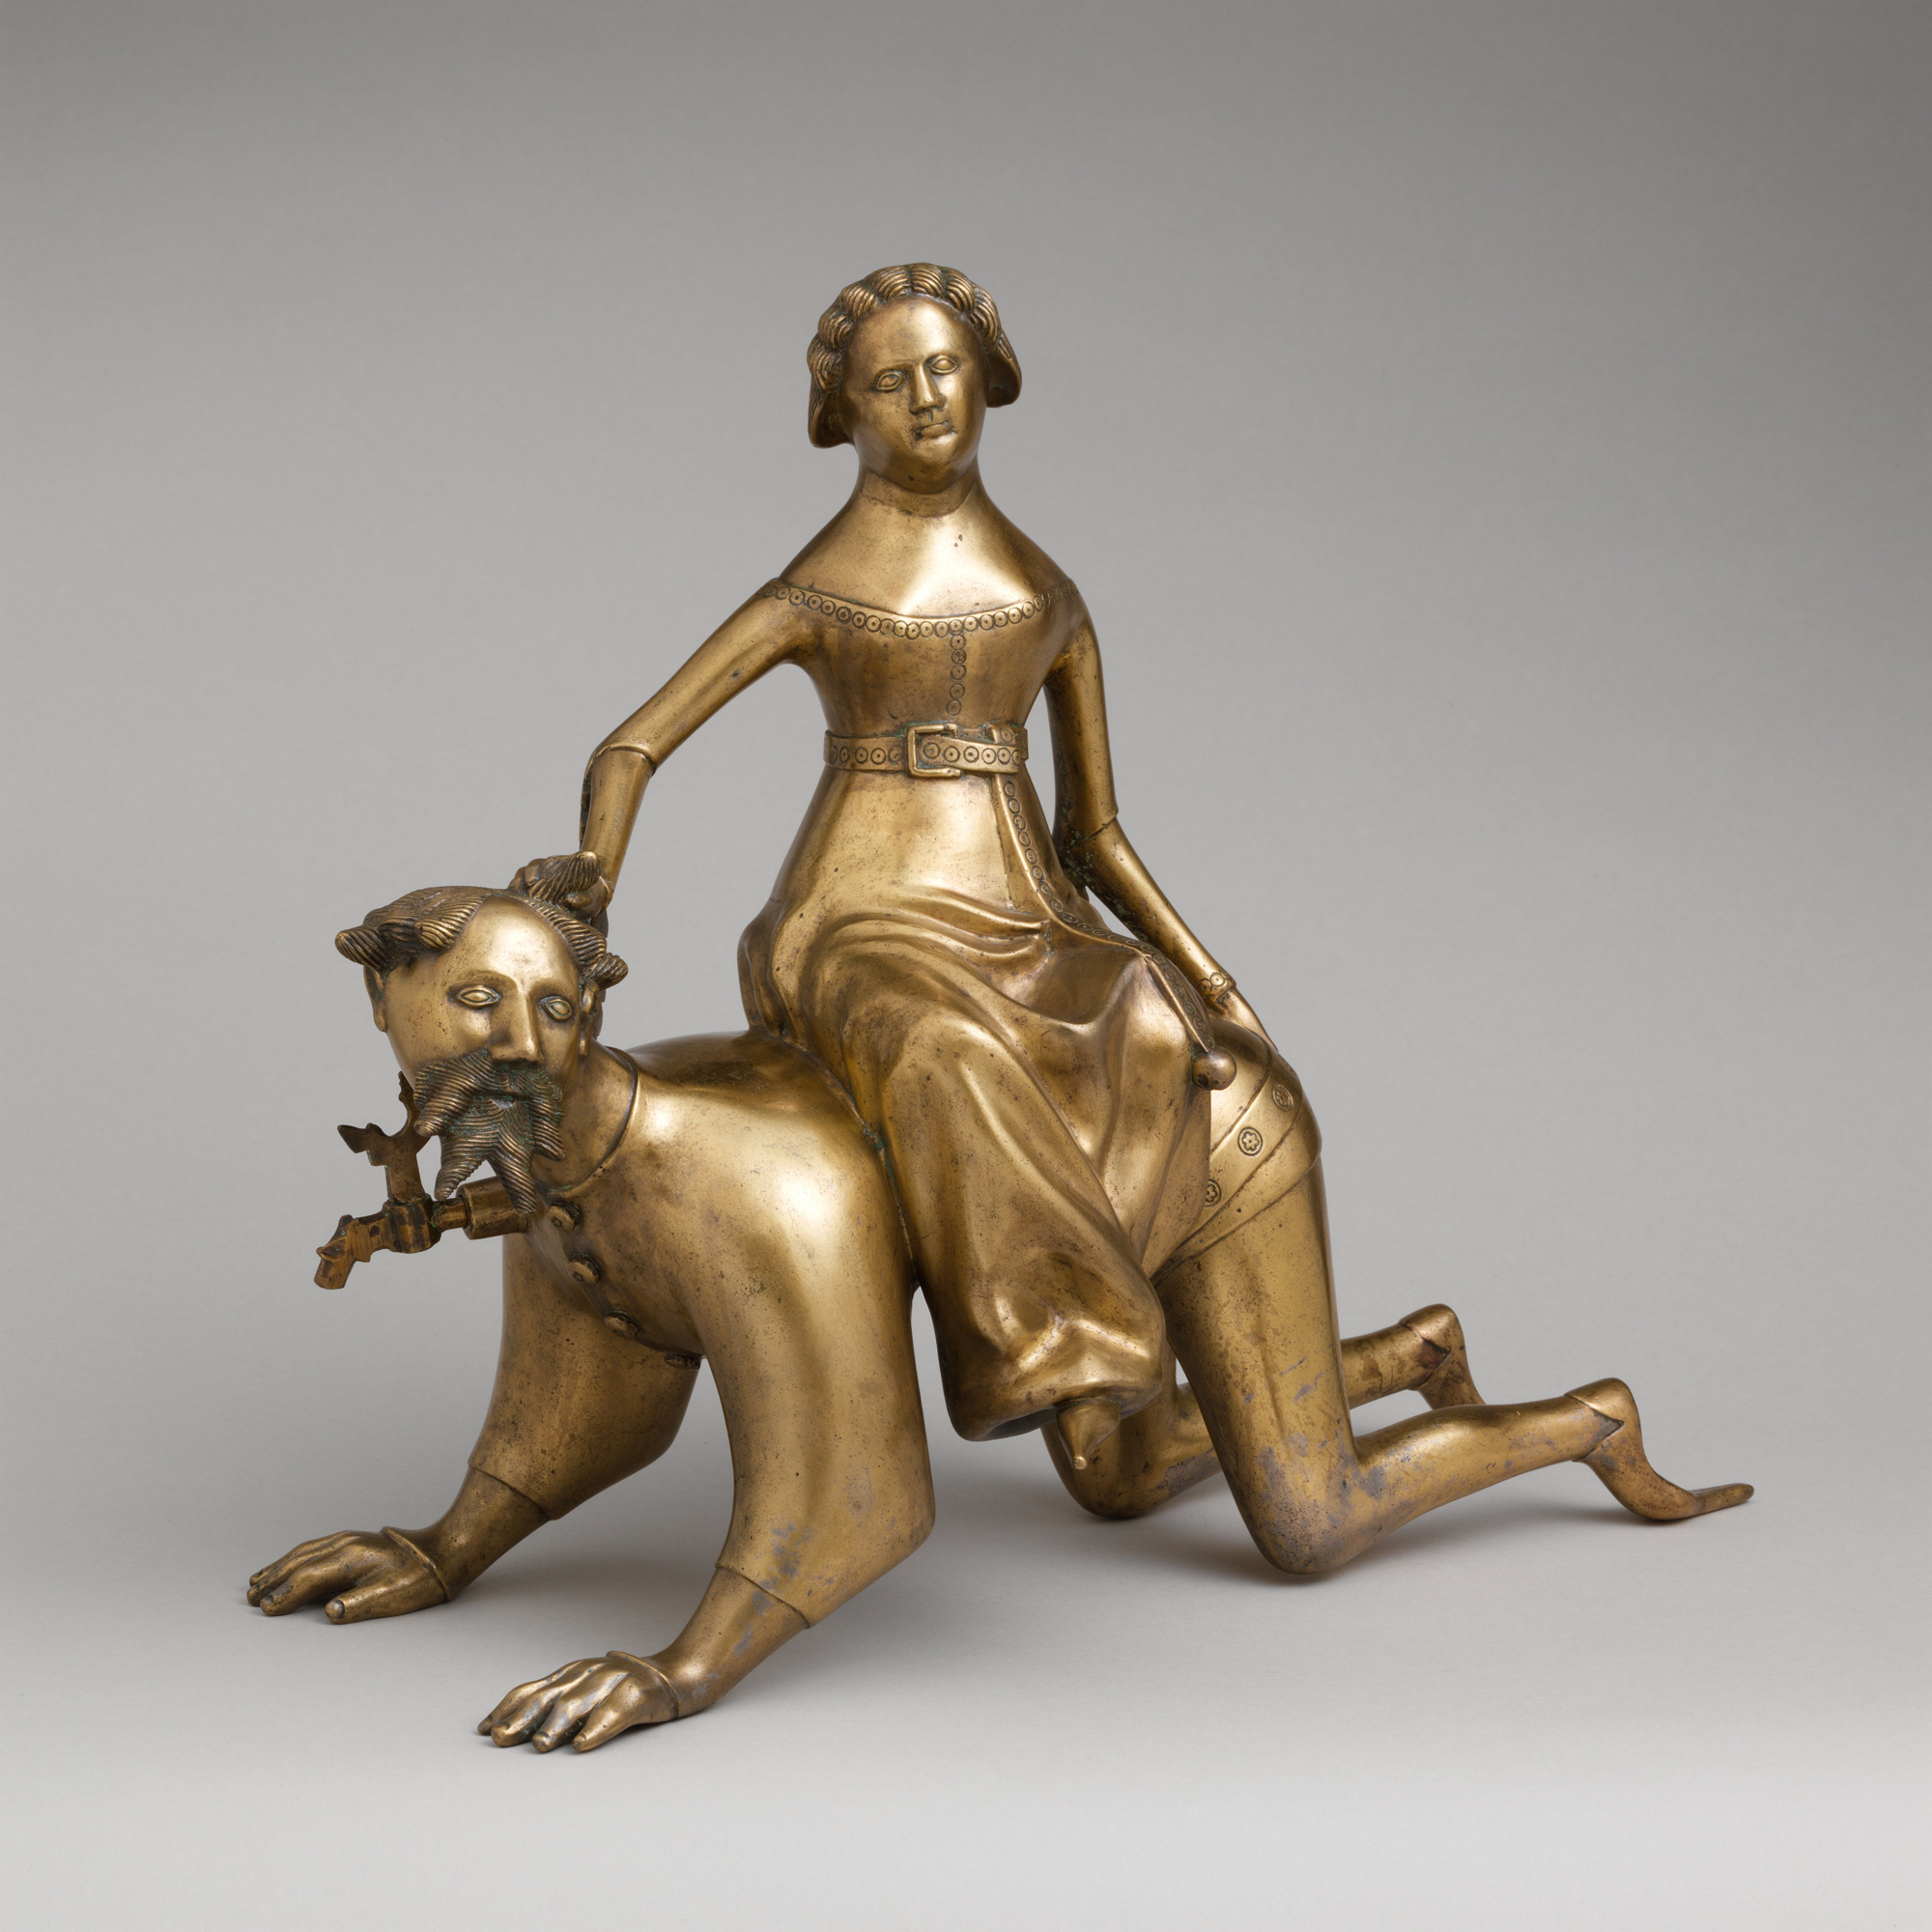 This aquamanile from the late 14th or early 15th century shows Phyllis riding Aristotle, who in this moment, abandoned philosophy for lust. Courtesy photo 